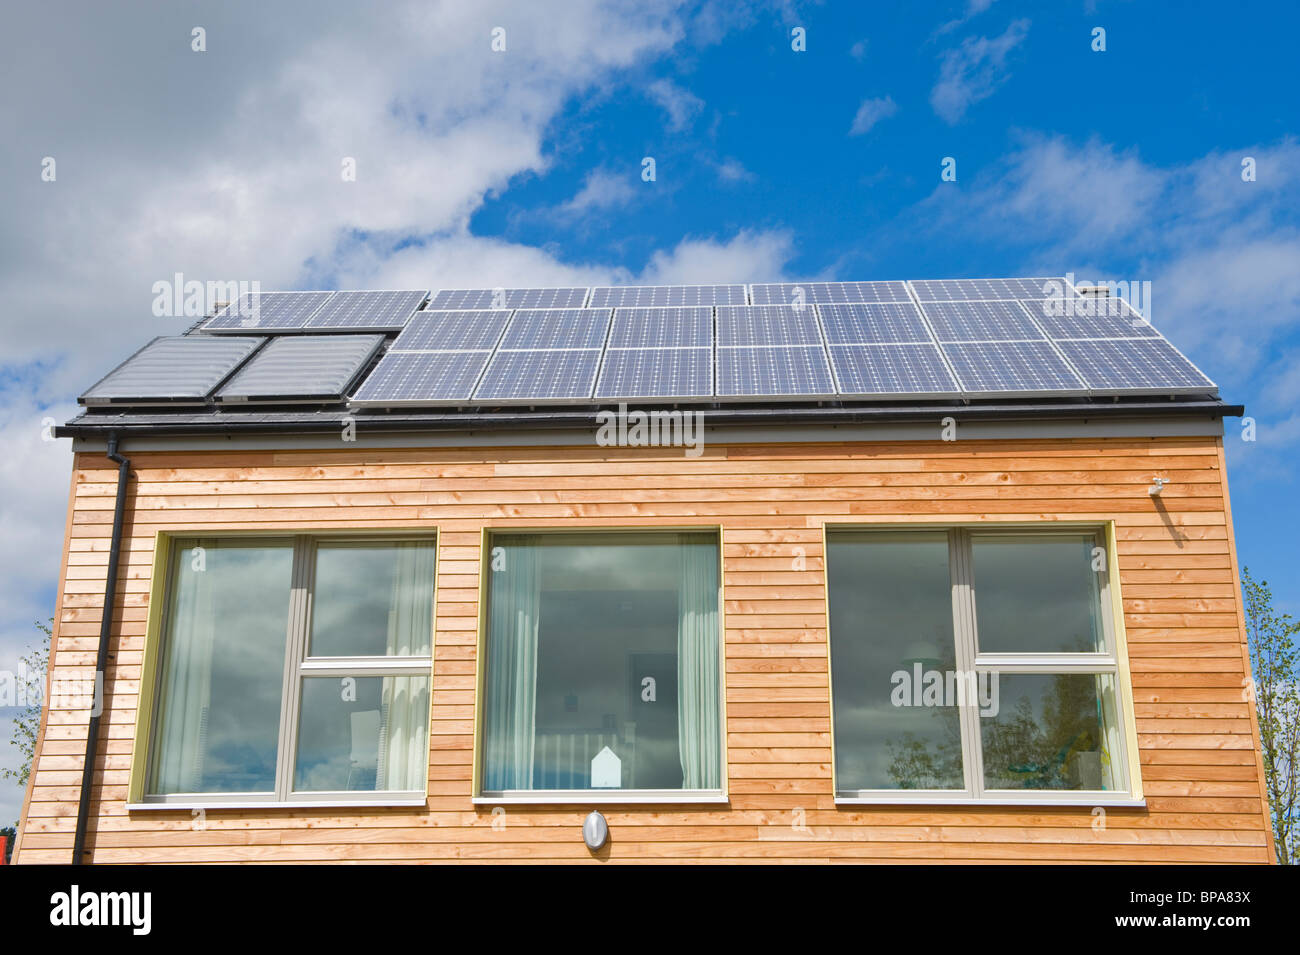 Timber clad zero carbon passive house with triple glazed windows & roof covered with solar panels for electricity and hot water Stock Photo